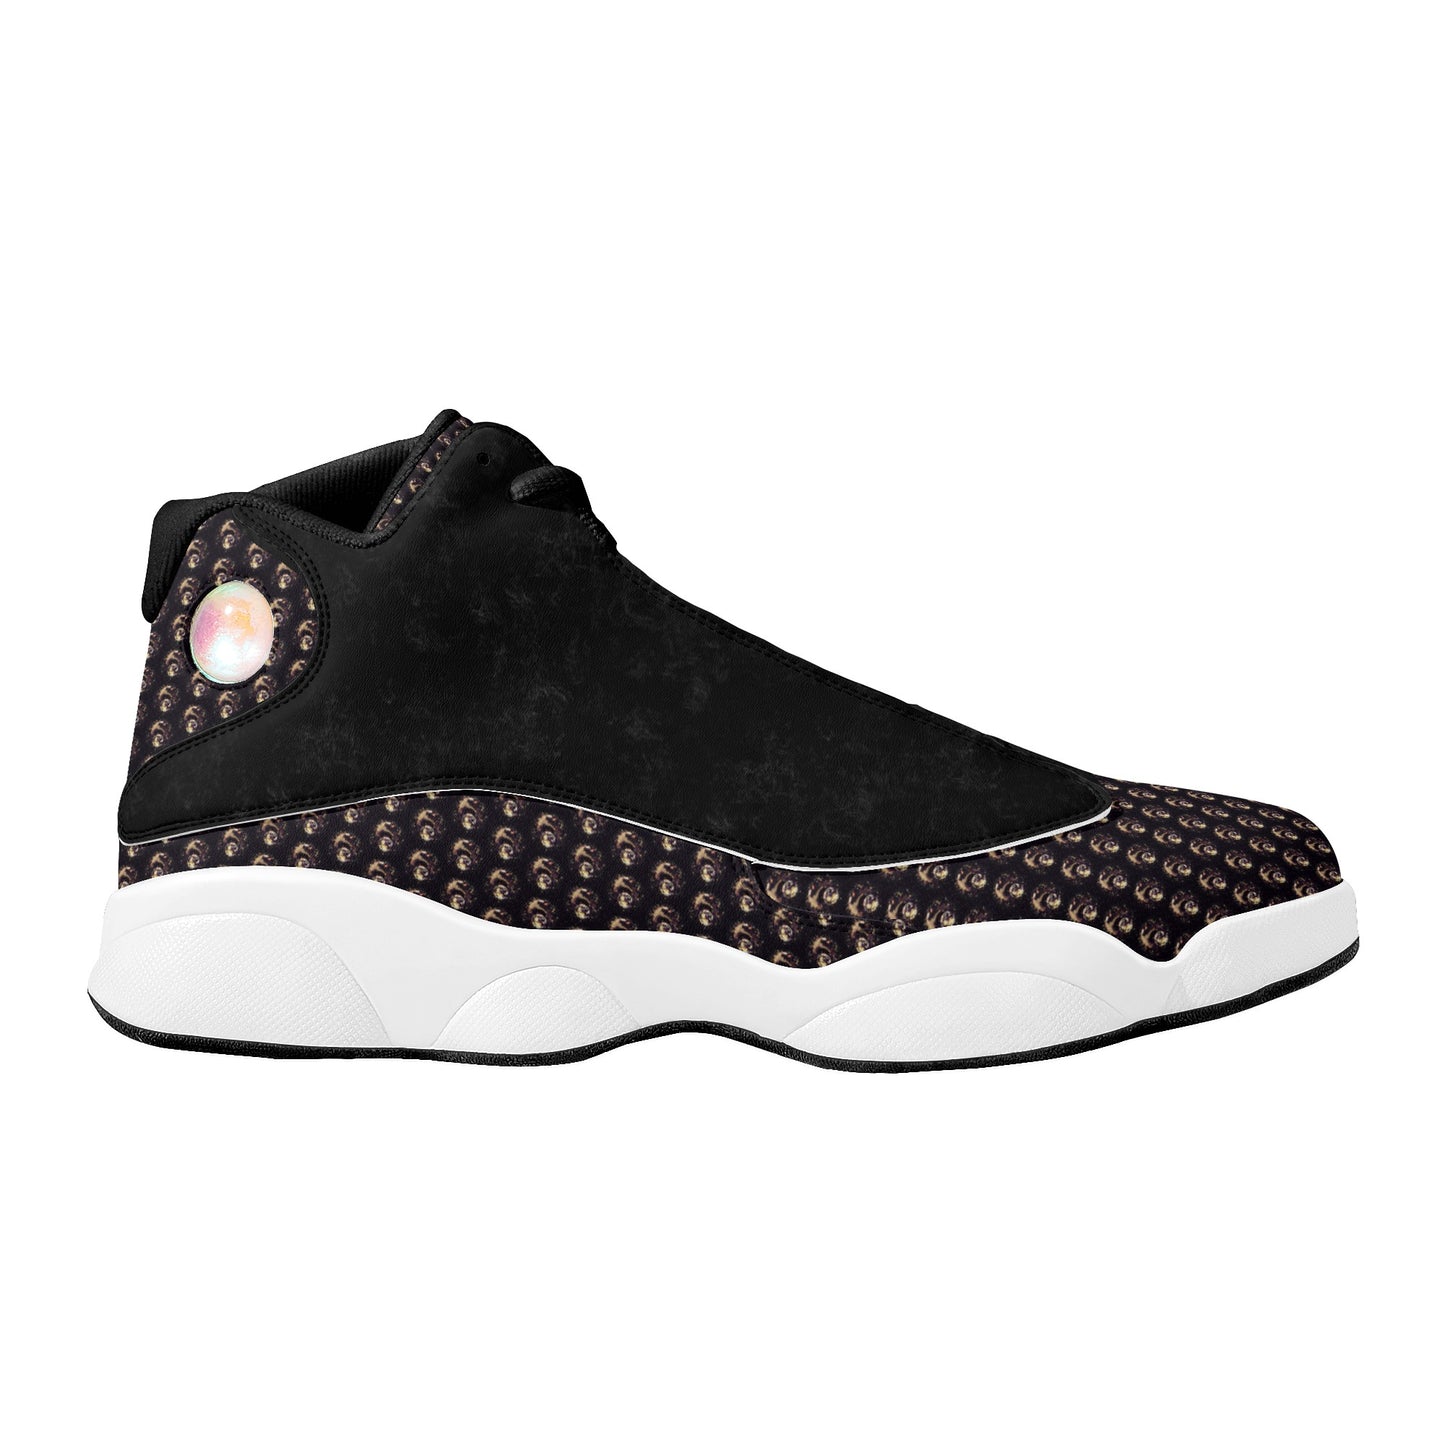 CV20YL - ONLY THE STRONG Mens White Soles Basketball Shoes